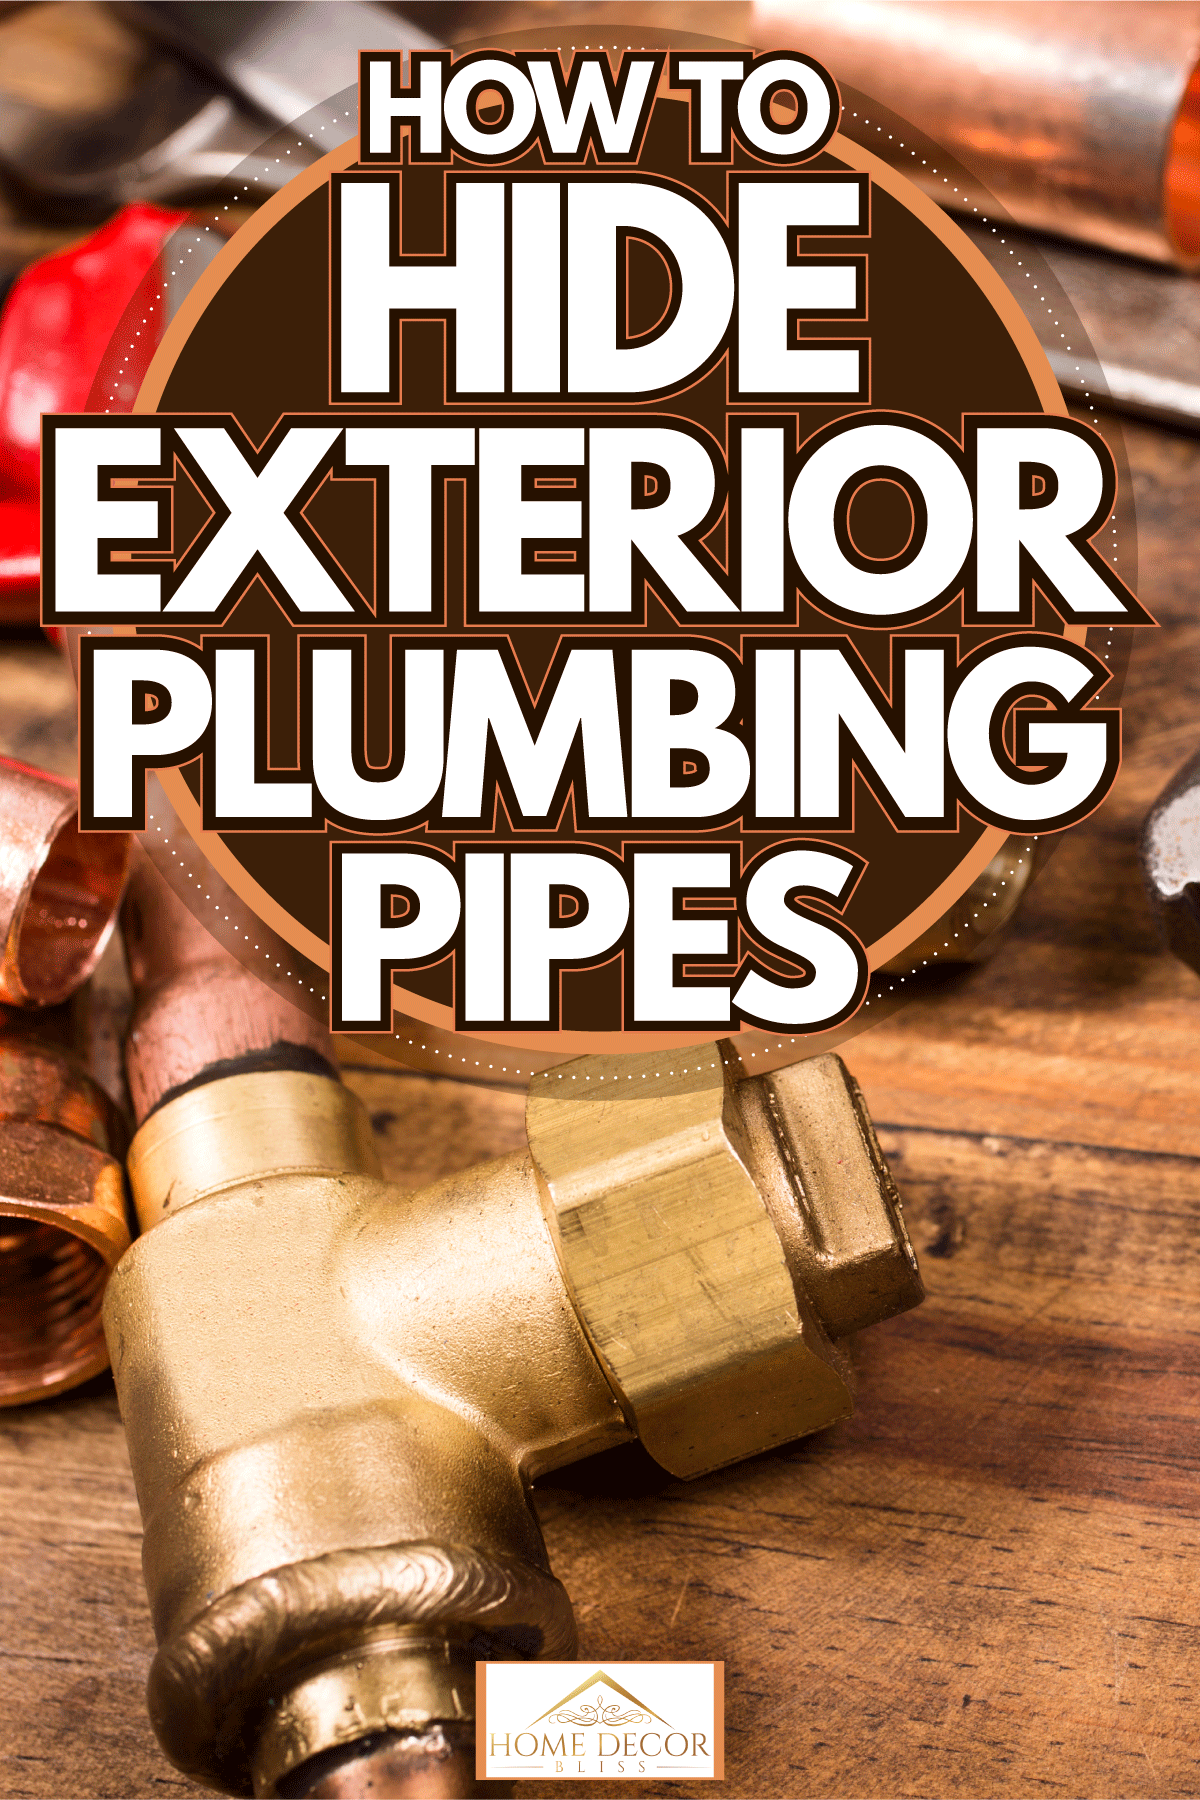 Plumbing pipes and plumbing equipment's on the table, How To Hide Exterior Plumbing Pipes